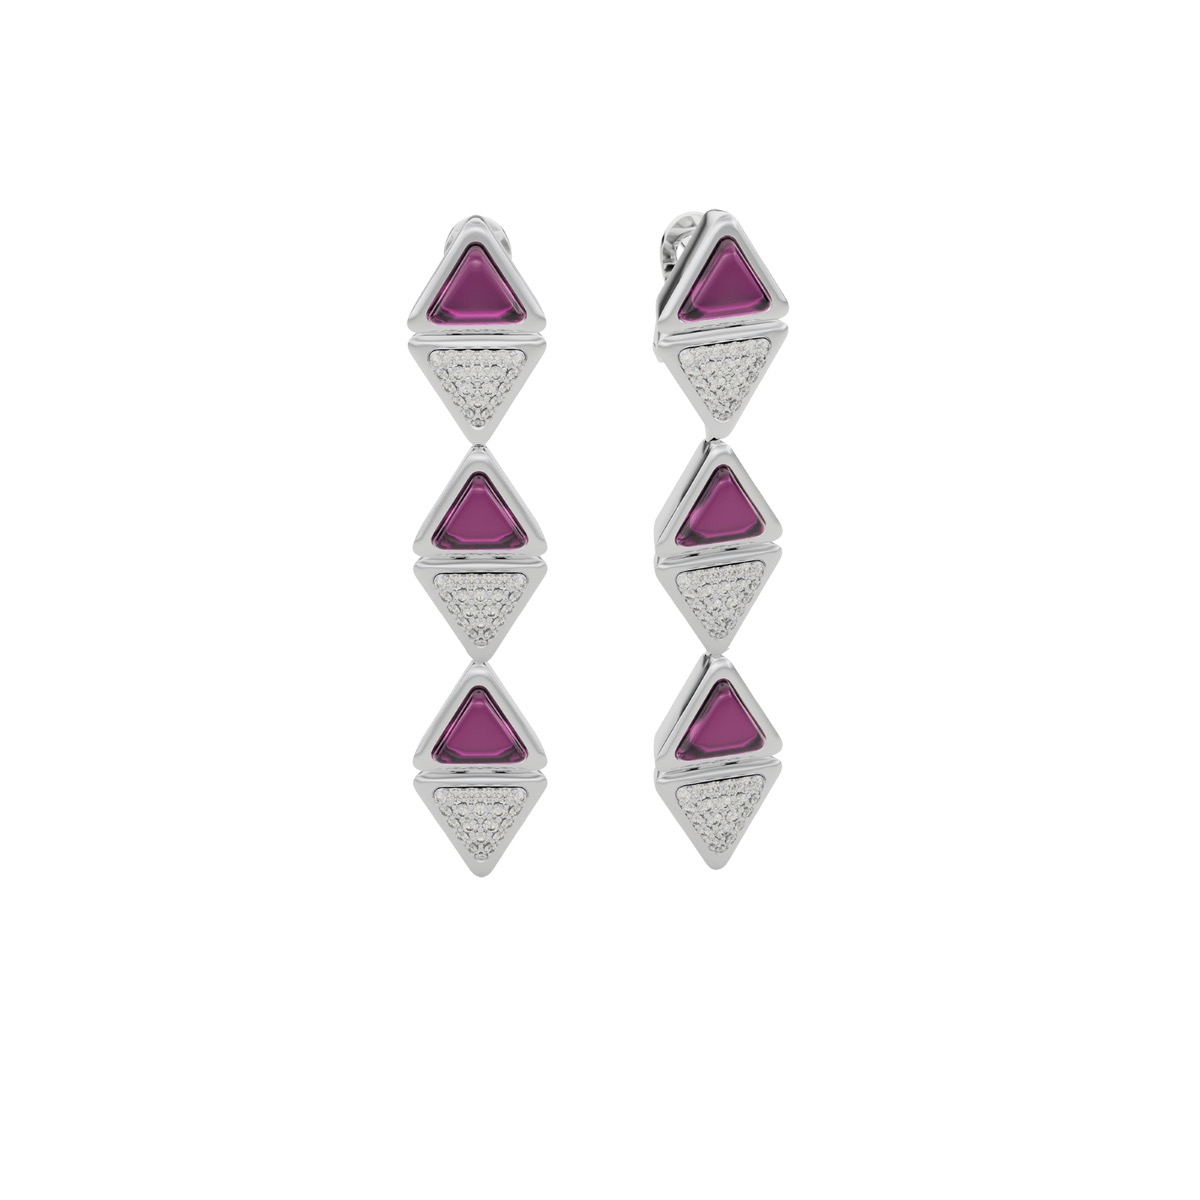 Pink Garnet and White Diamonds pendant earrings - Mirror Exquisite Collection